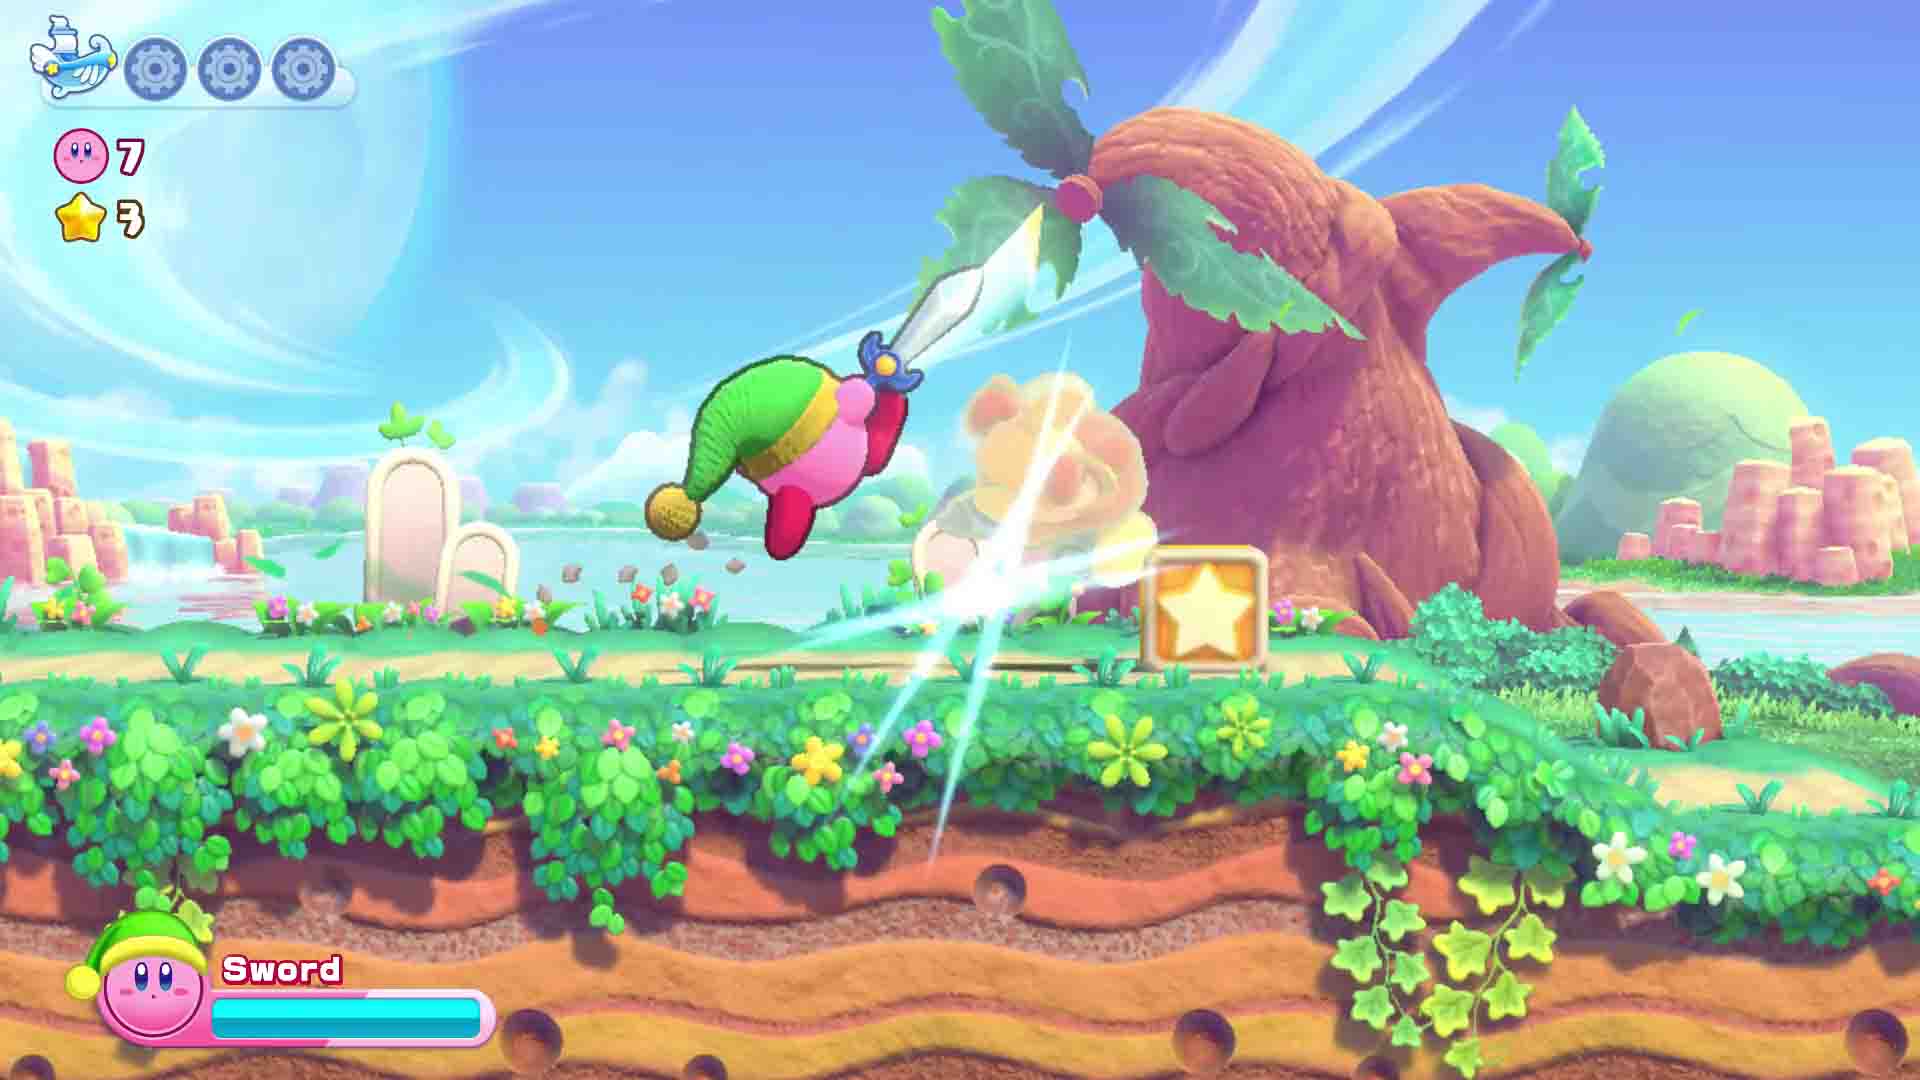 Kirby's Return to Dream Land Deluxe - 19 Minutes of Demo Gameplay 